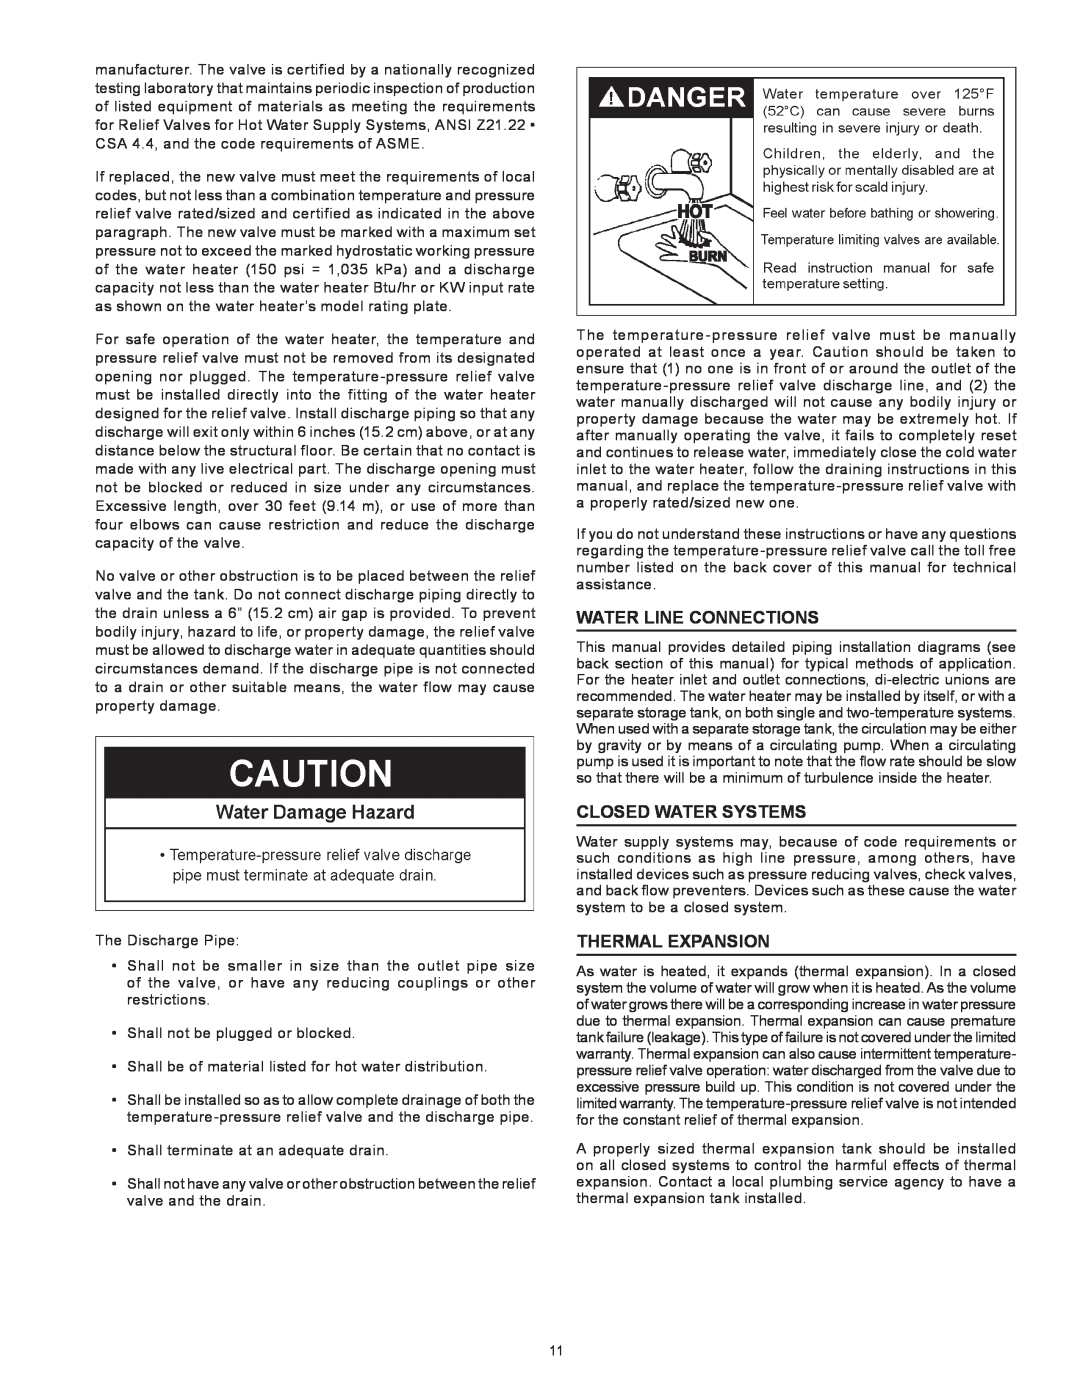 A.O. Smith Dve-52/80/120 instruction manual Water Line Connections, Closed Water Systems, Thermal Expansion 